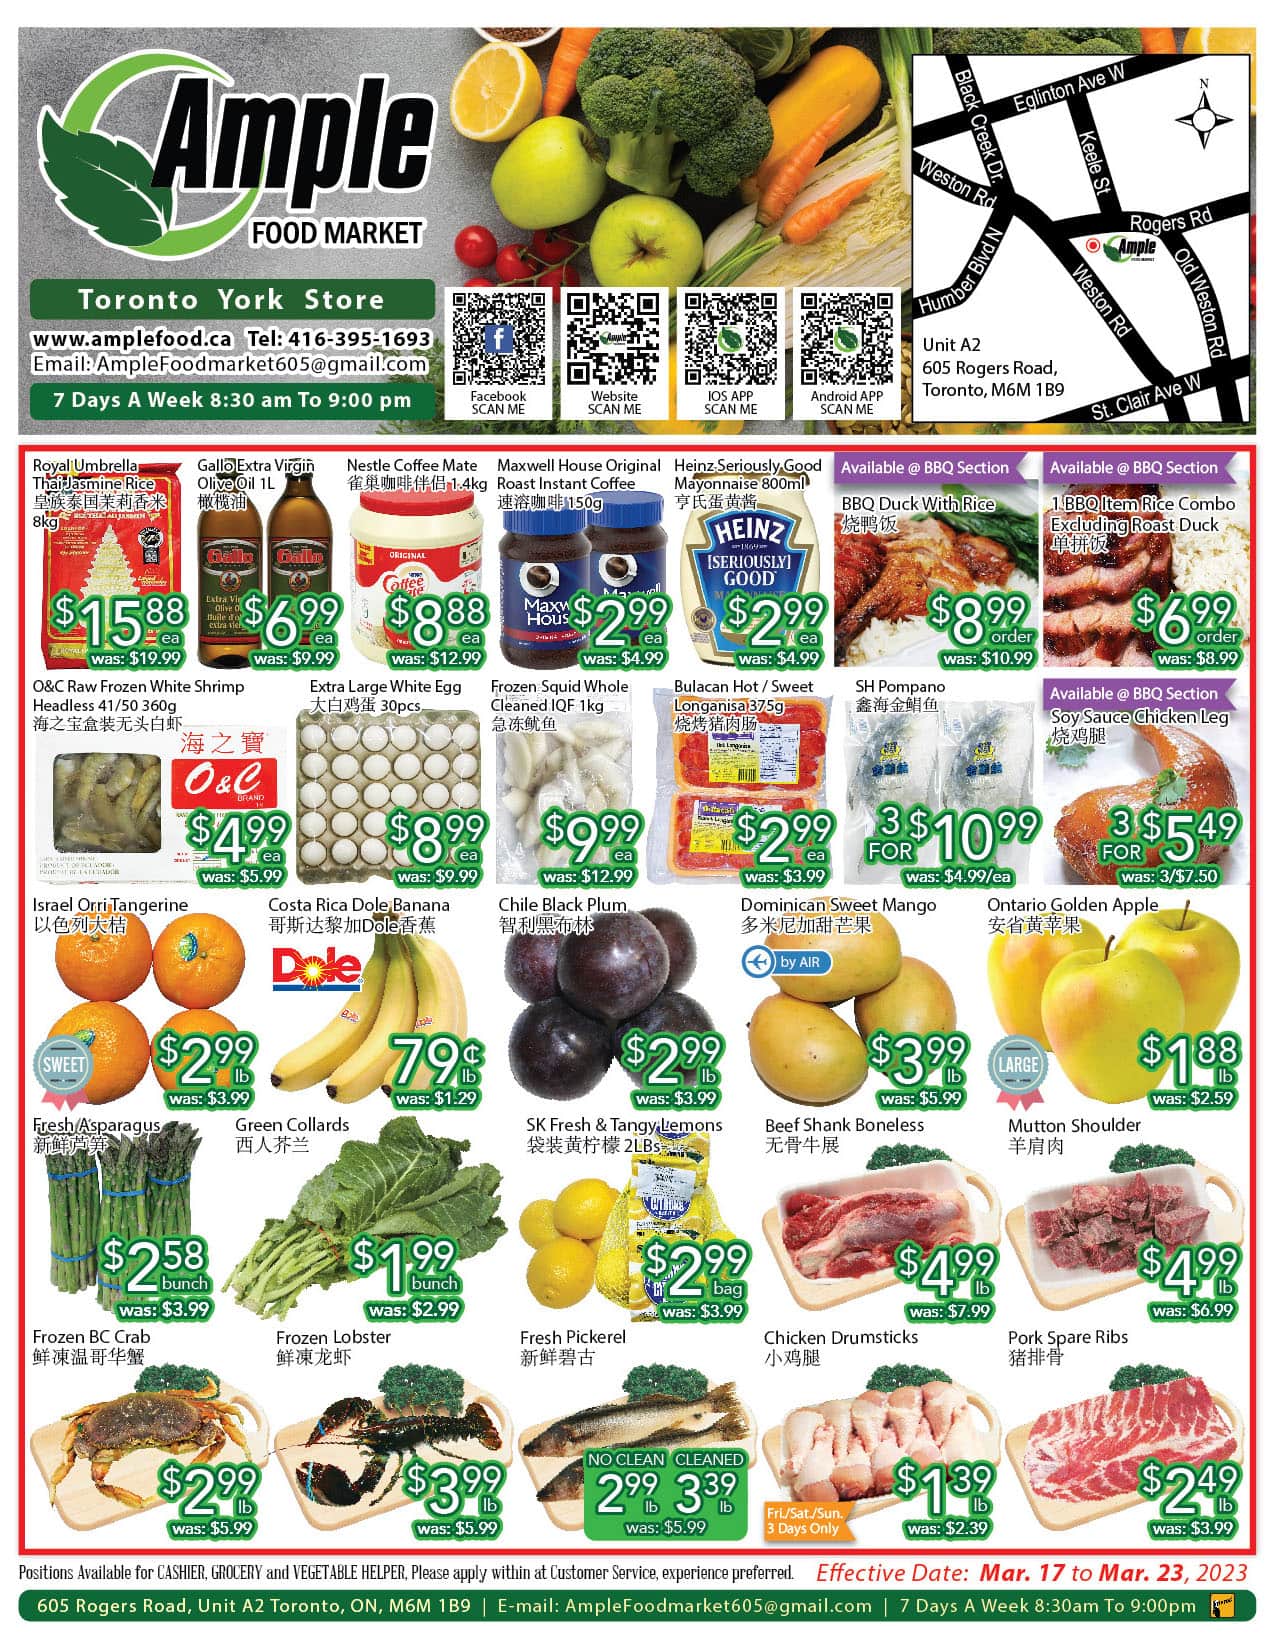 Ample Food Market - Toronto York Store - Weekly Flyer Specials - Page 1